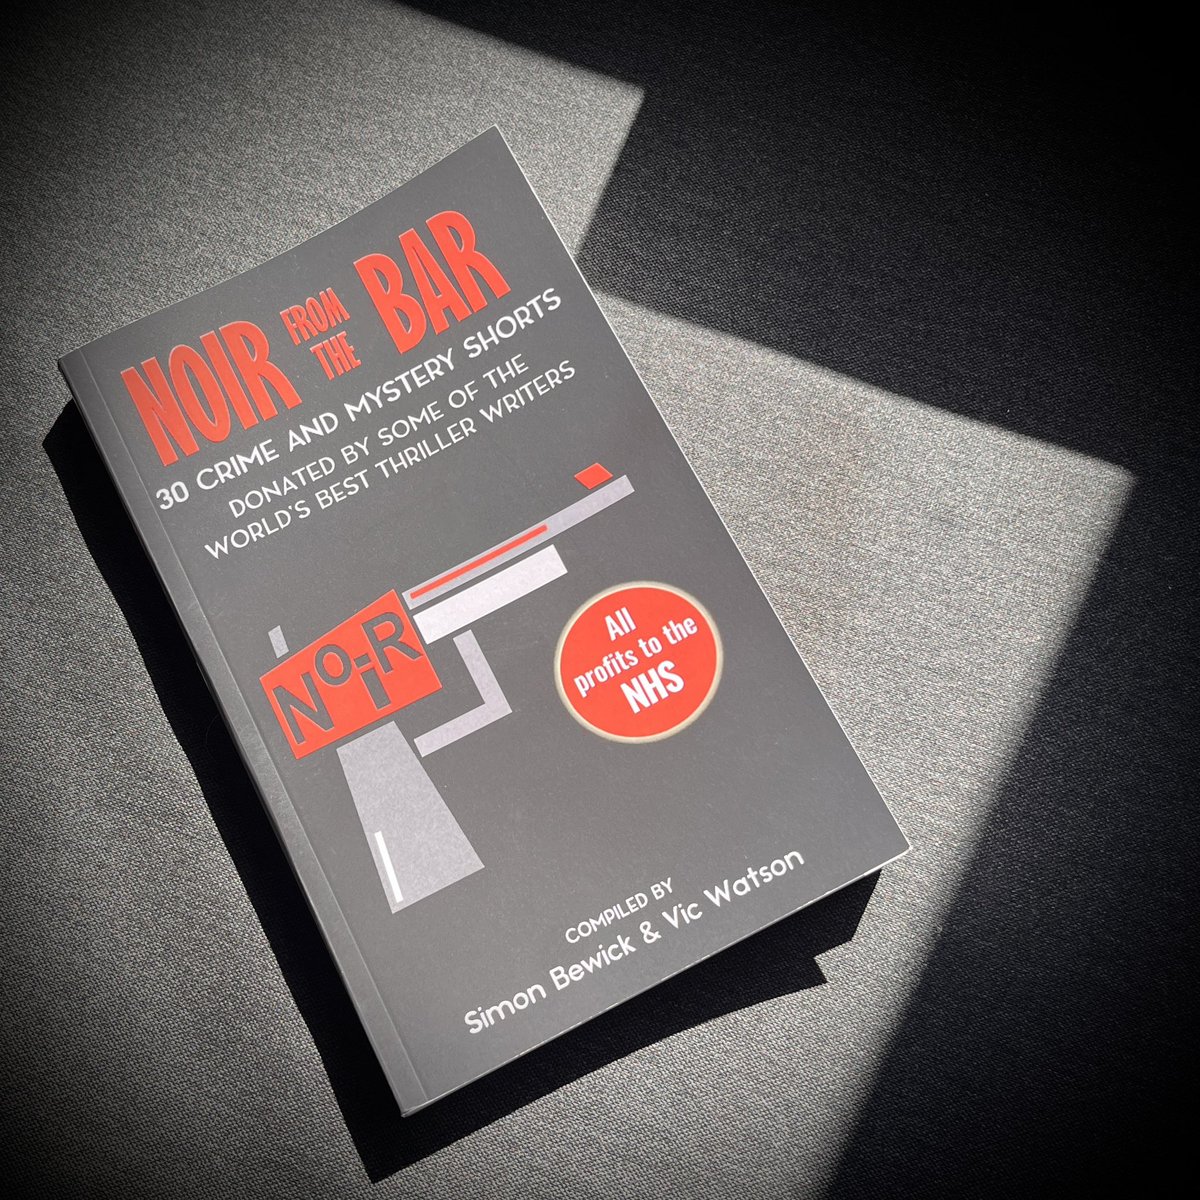 Thank you @SimonBewick for my giveaway win – #NoirFromTheBar Might make this my reading material on the journey down to @HarrogateFest @TheakstonsCrime If you like the look of this I’ve put a link to buy your very own copy in my linktree. All profits got to the NHS.